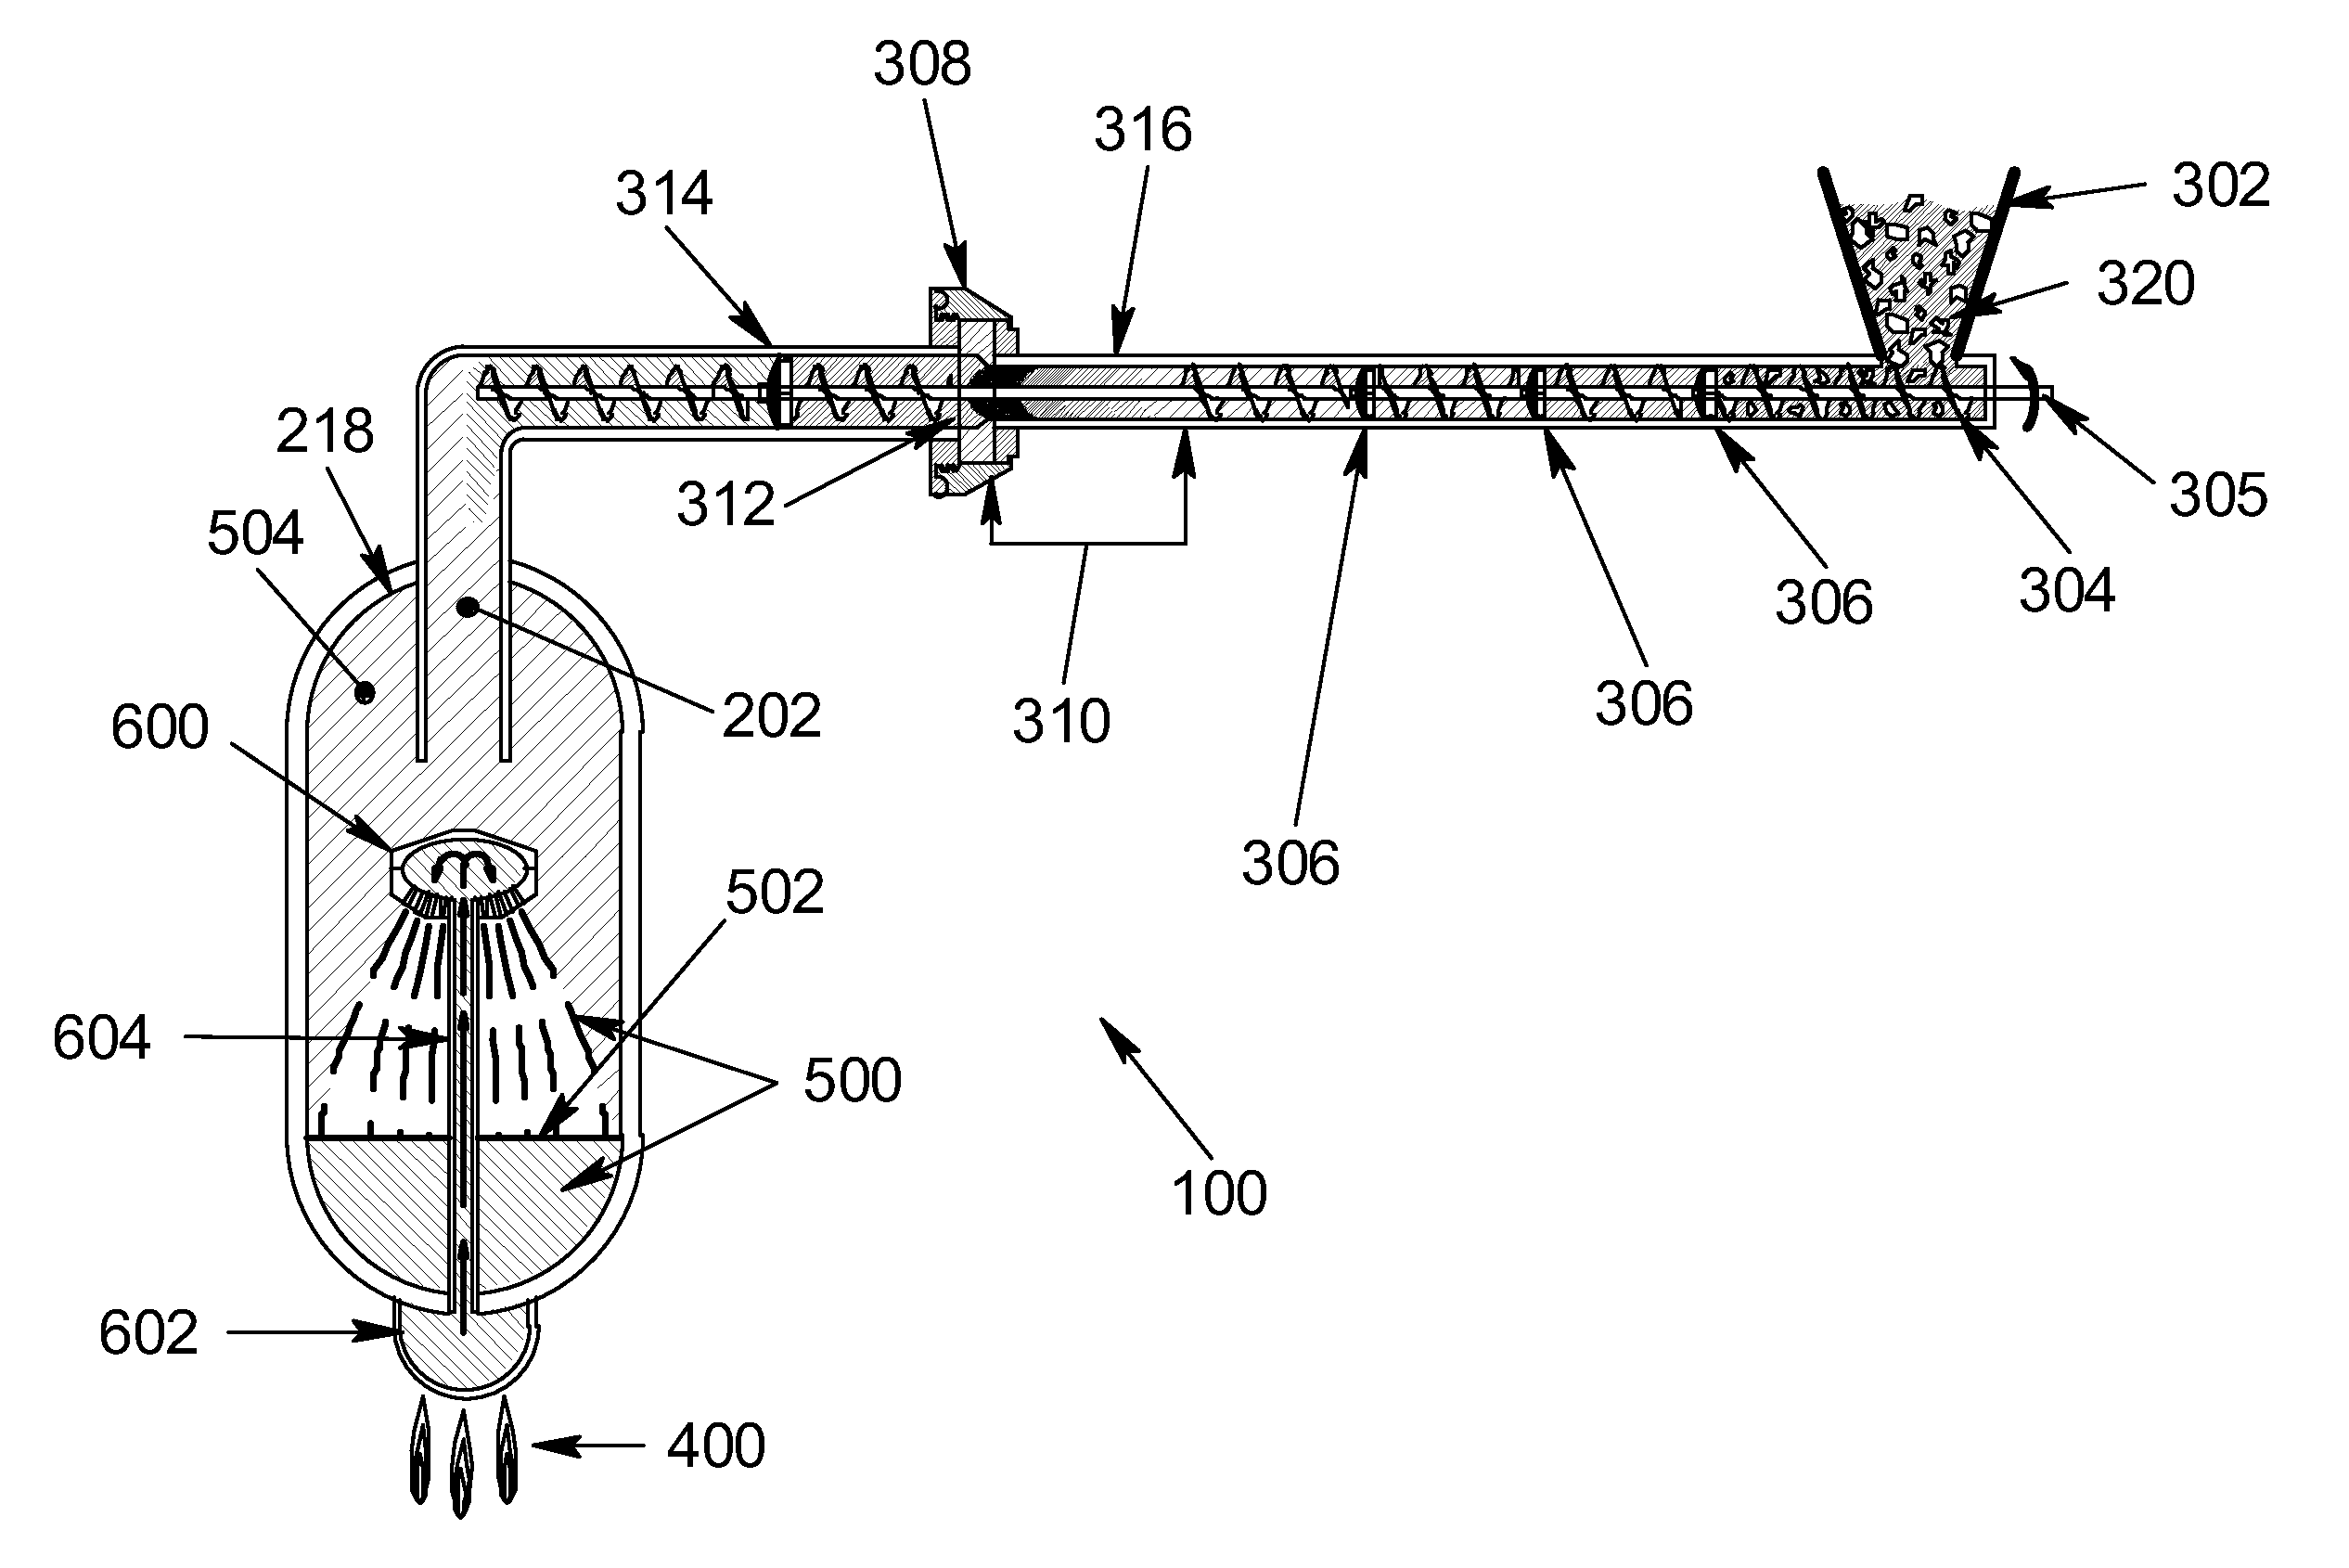 System and method for a constituent rendering of biomass and other carbon-based materials